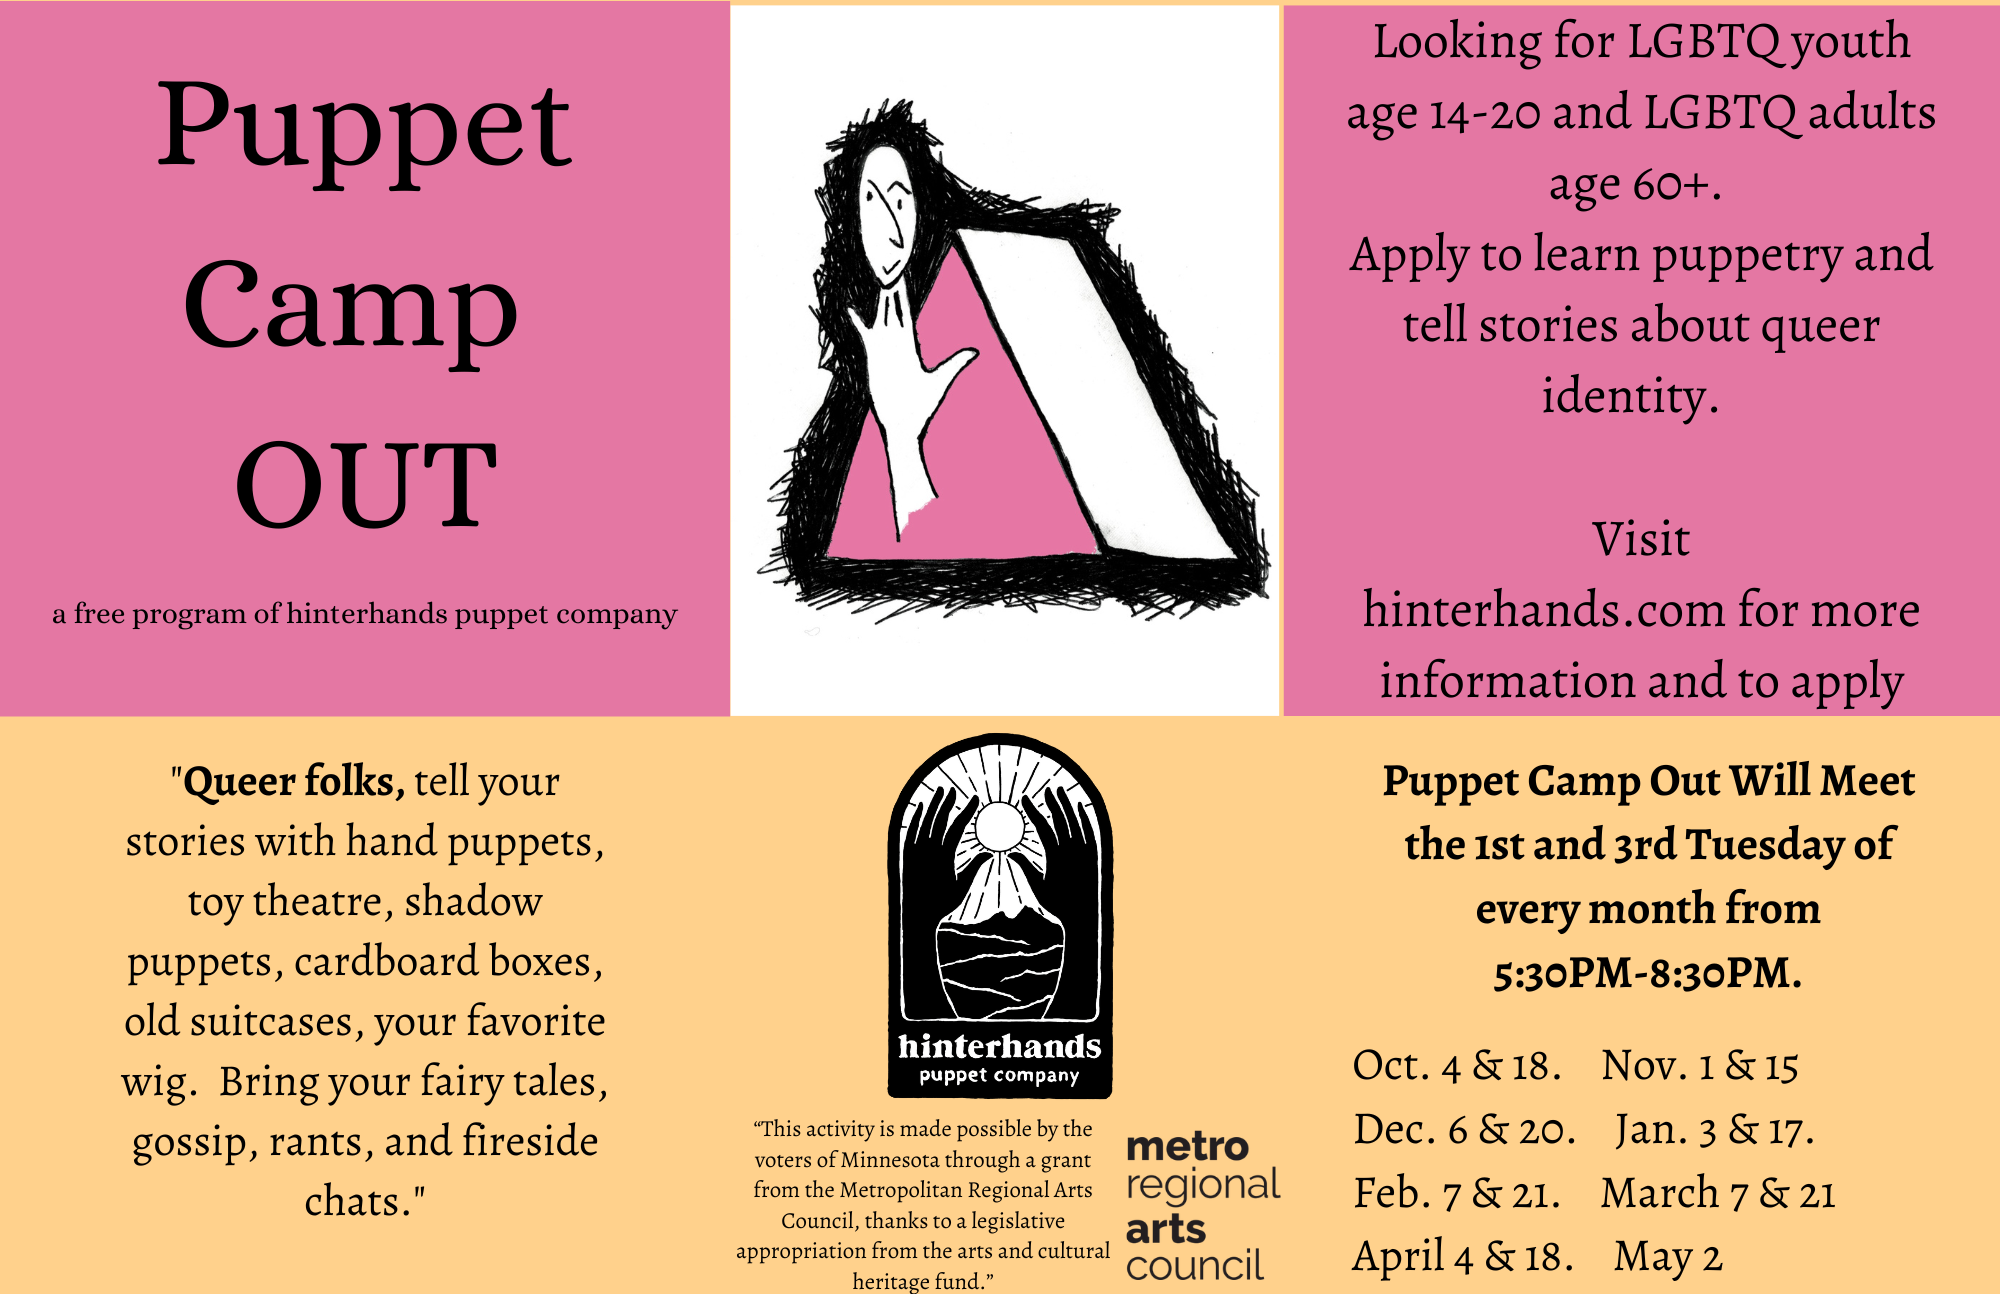 Puppet Camp Out